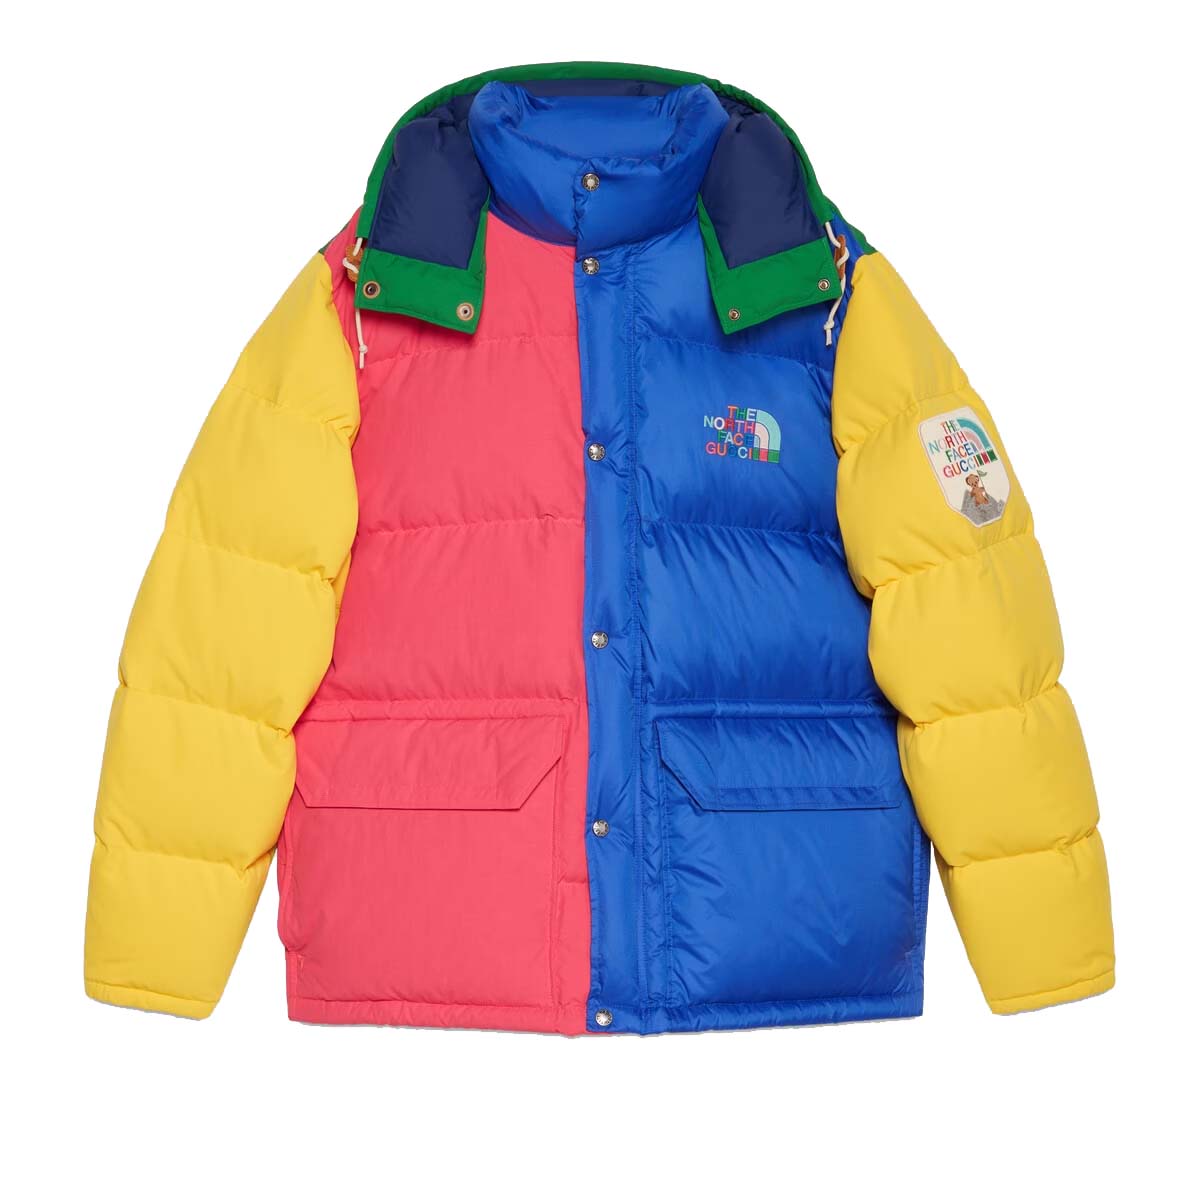 Gucci x The North Face Down Jacket Yellow/Red/Blue/Green Colorblock